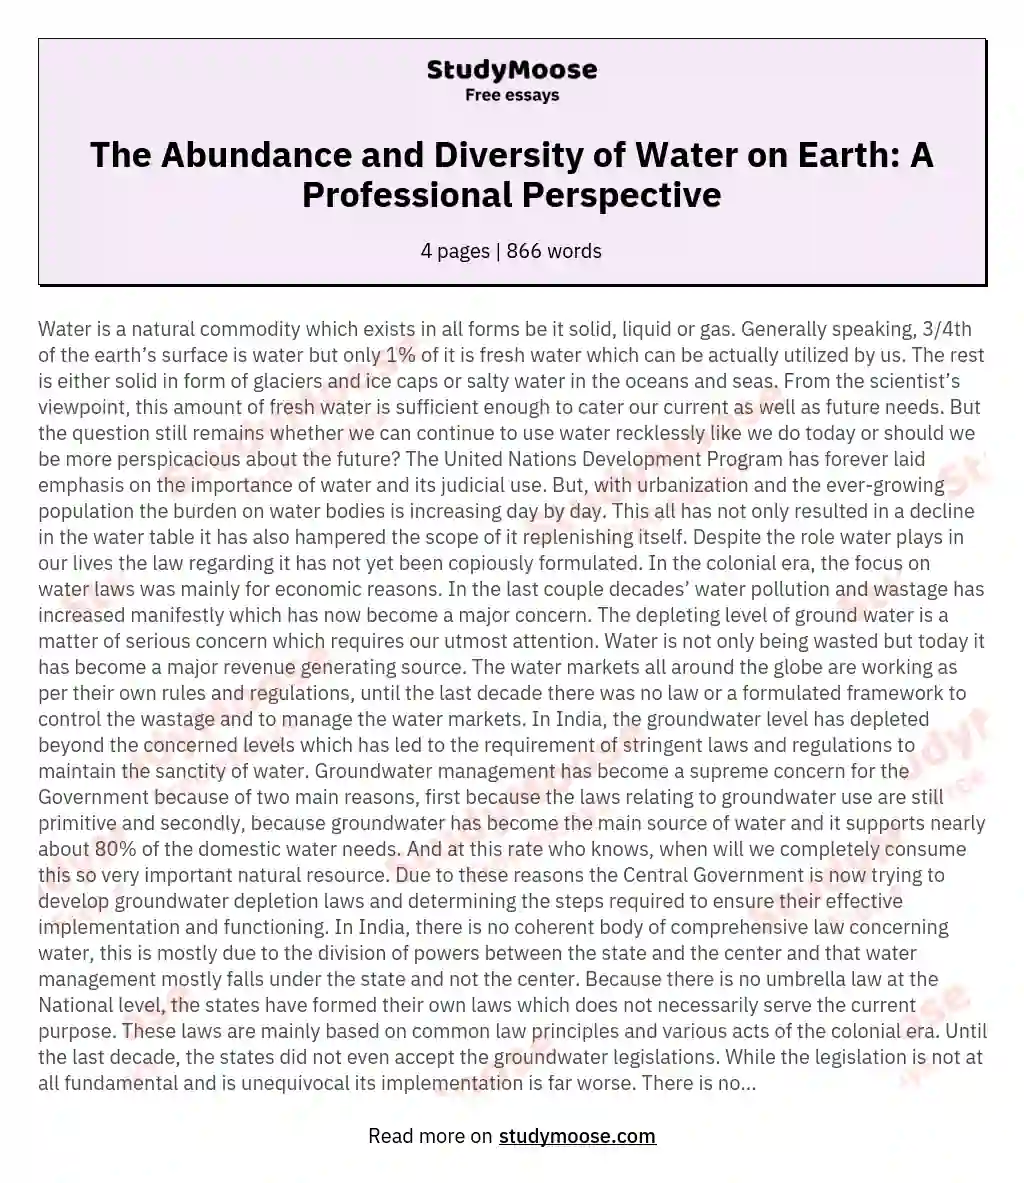 The Abundance and Diversity of Water on Earth: A Professional Perspective essay